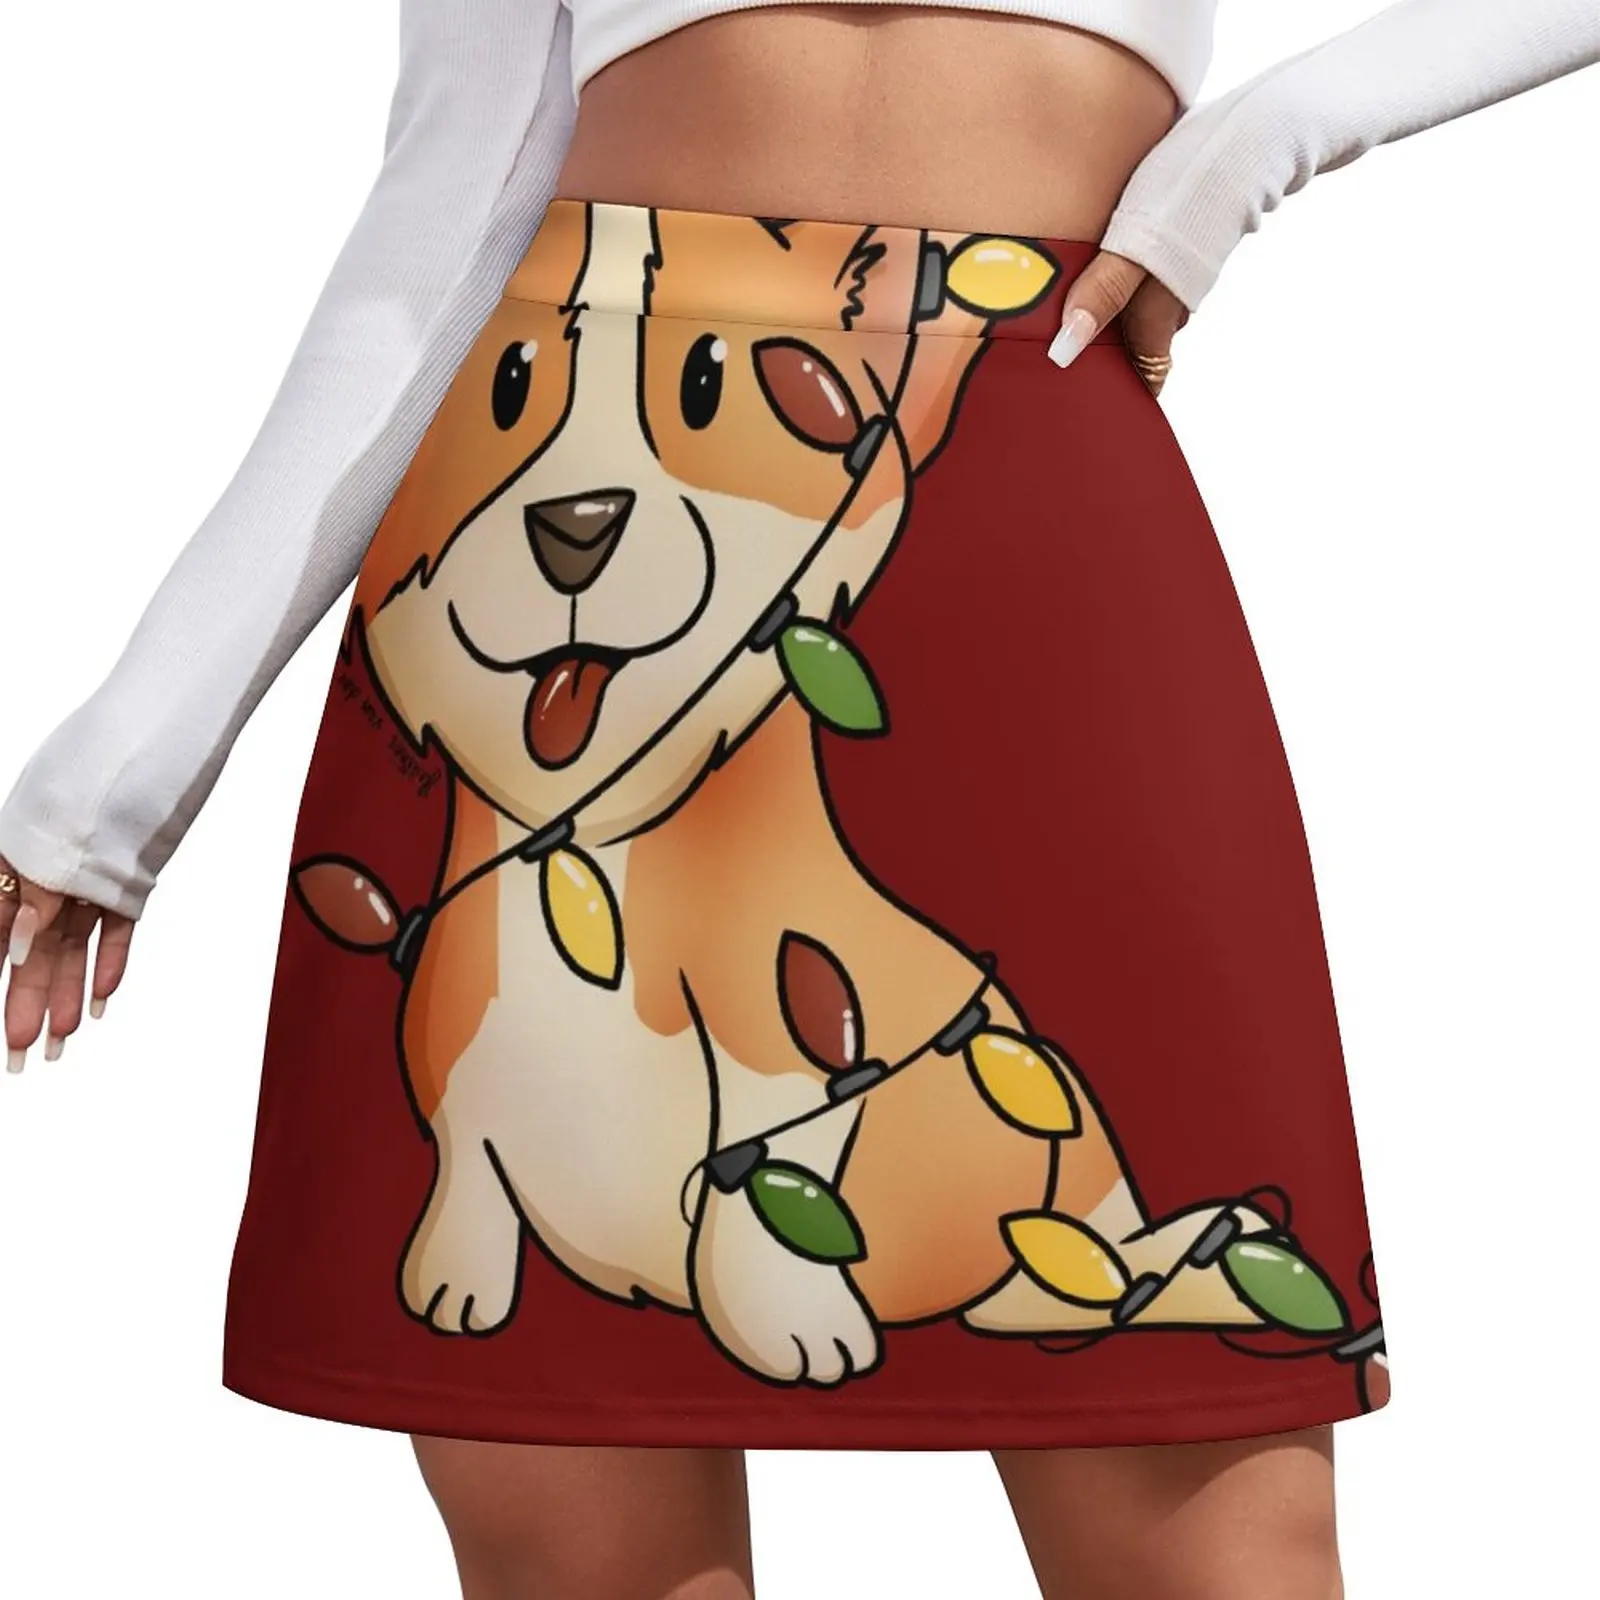 Our Little Cute Corgi Tangled in Christmas Lights On a Cheery Red Mini Skirt womens skirts Women clothing